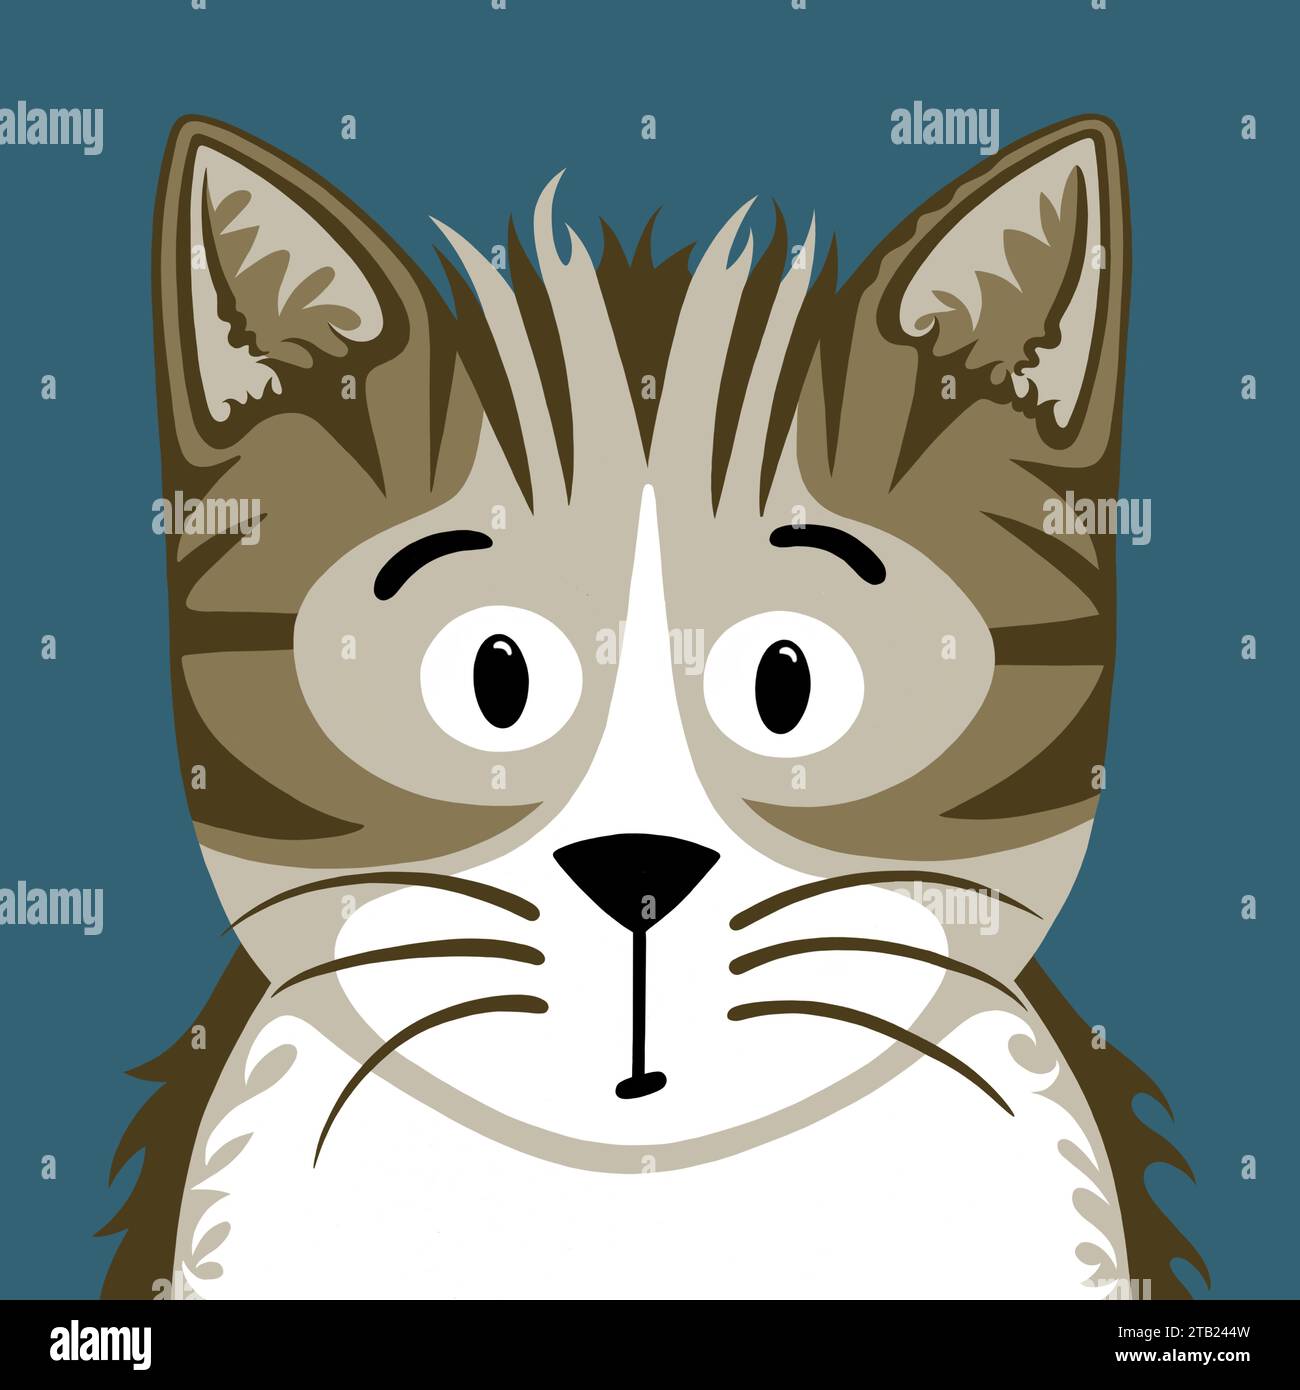 Tabby cat in a cute cartoon style. Tabby kitten portrait. Striped fur and long whiskers. Loveable cat portrait in a simple modern style. Stock Photo